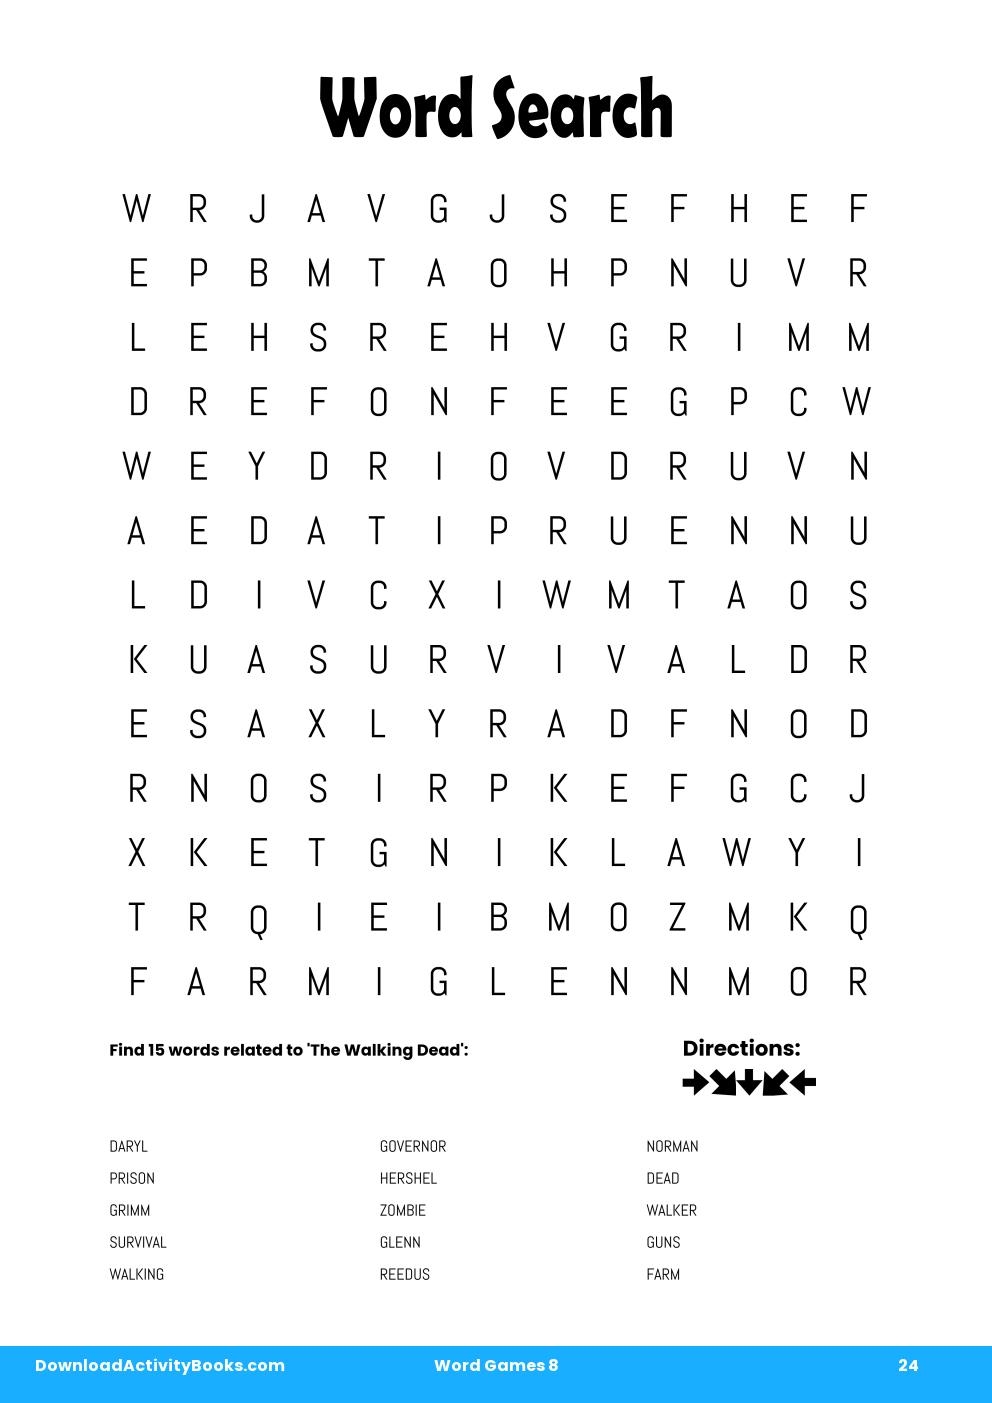 Word Search in Word Games 8